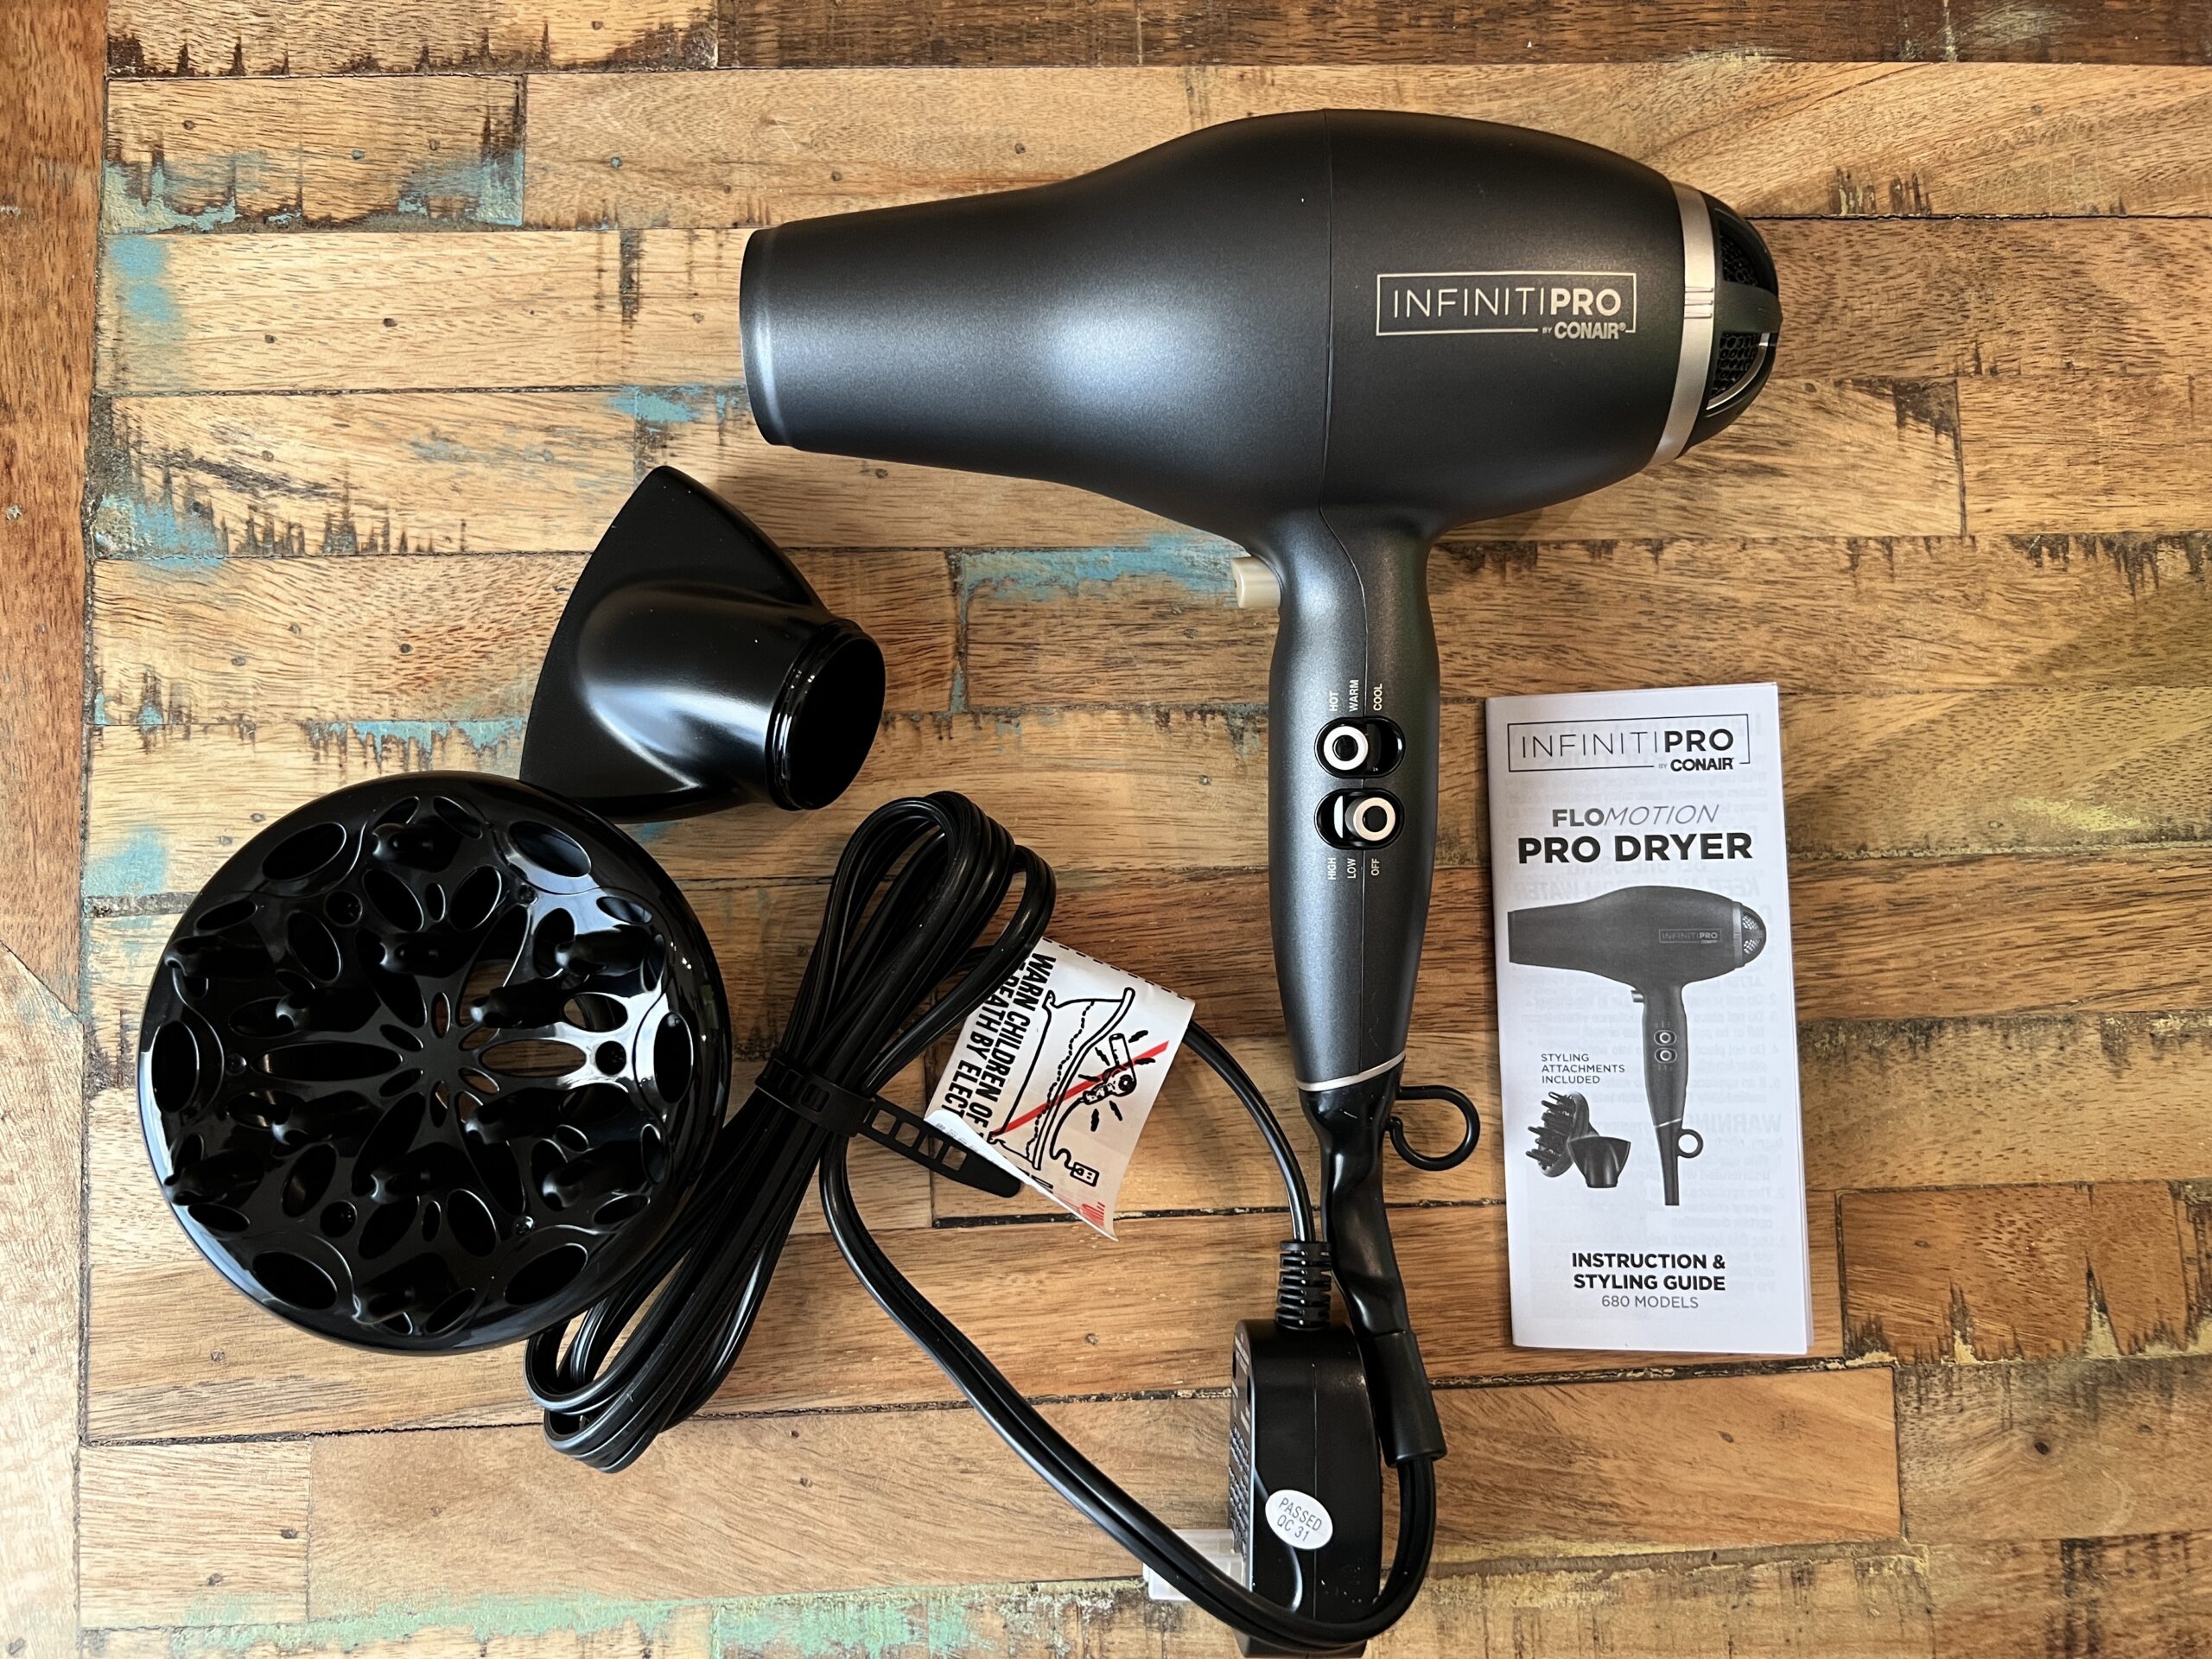 Flomotion Pro Dryer by Conair scaled